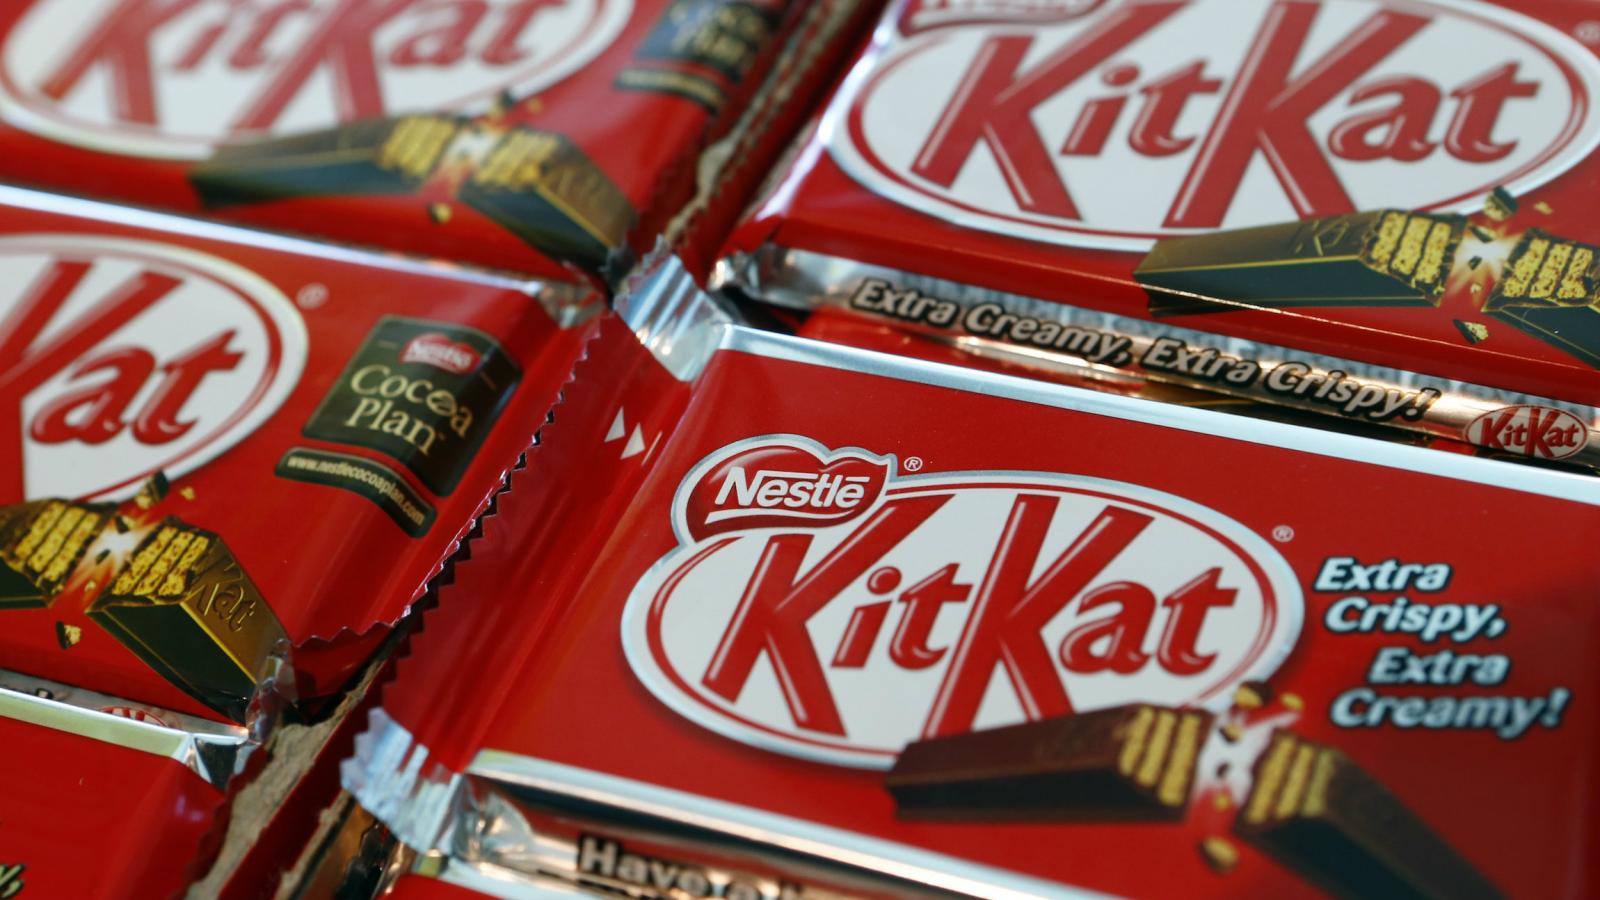 KitKat bars will no longer be made with cocoa harvested